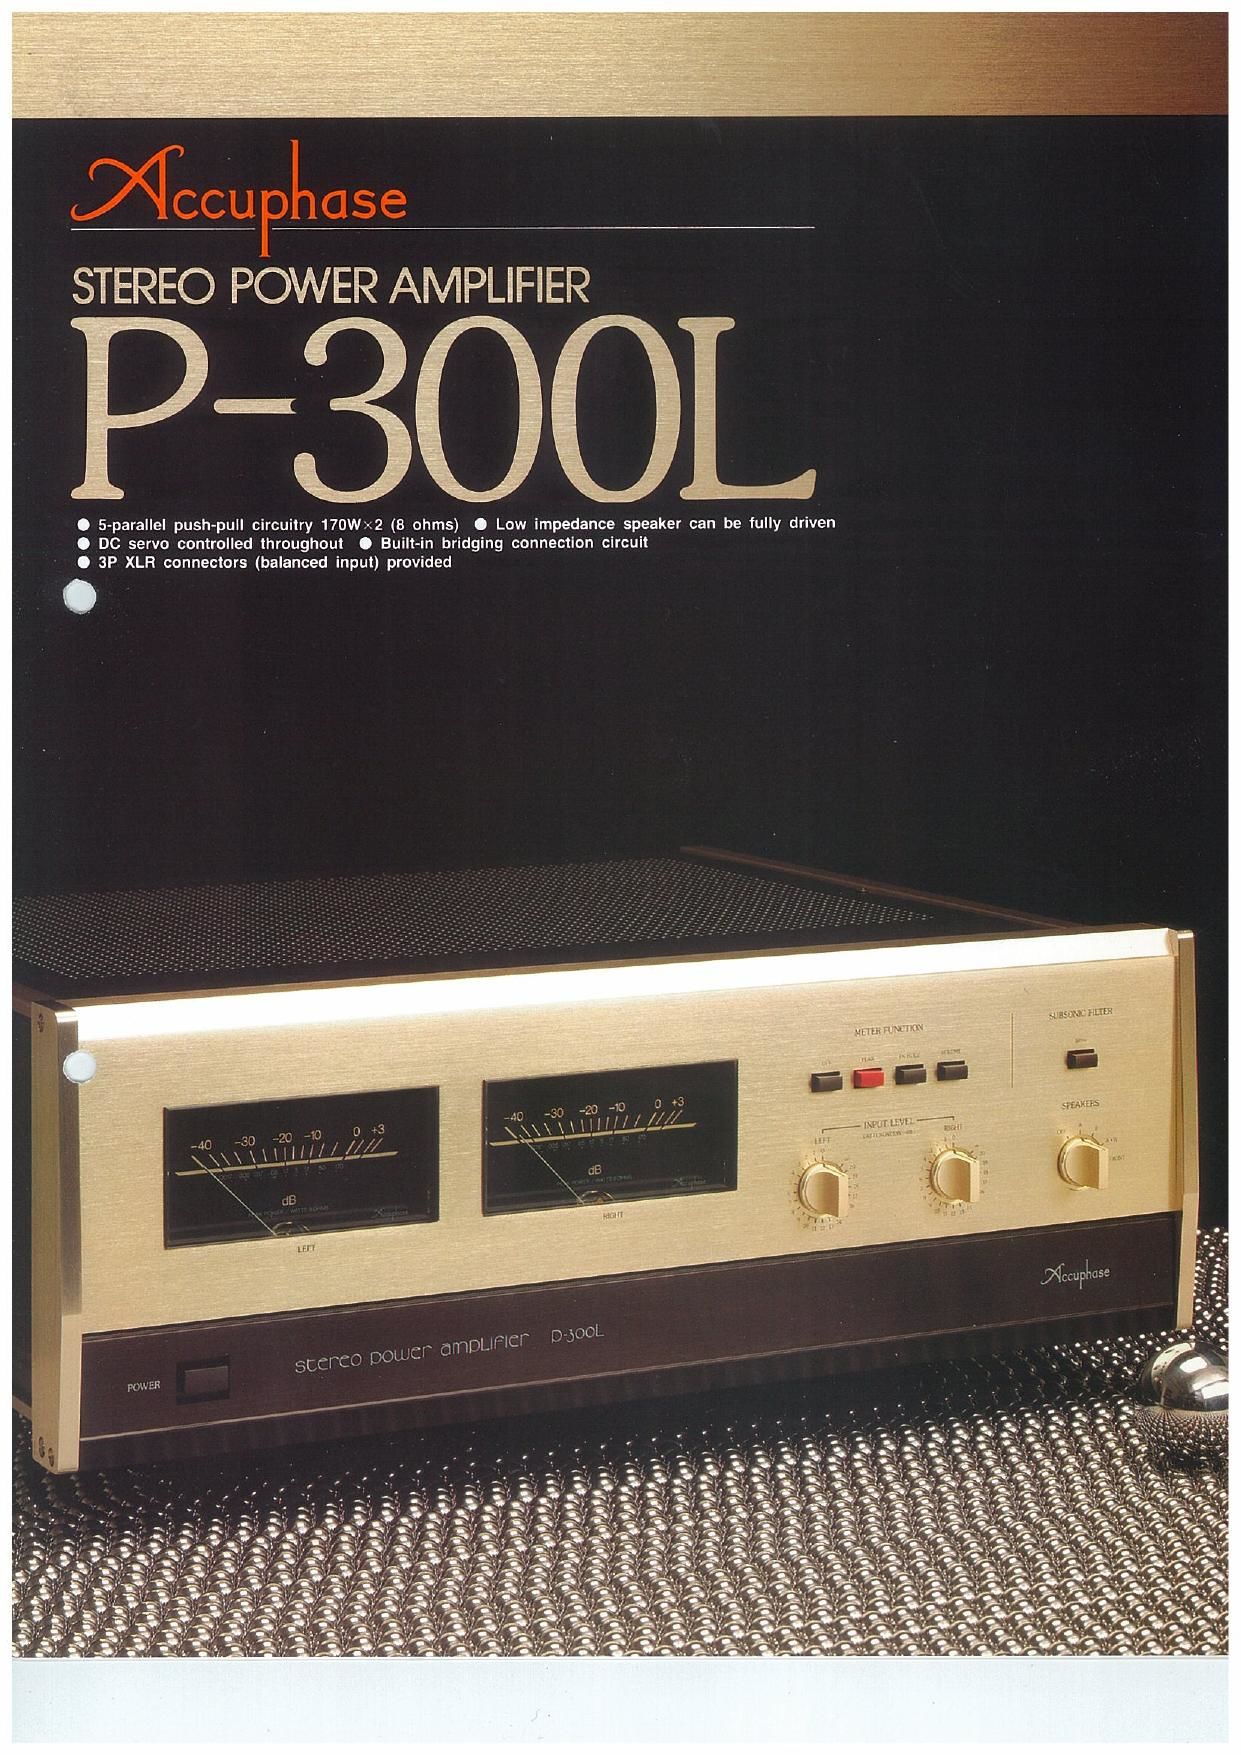 Accuphase P 300 L Brochure